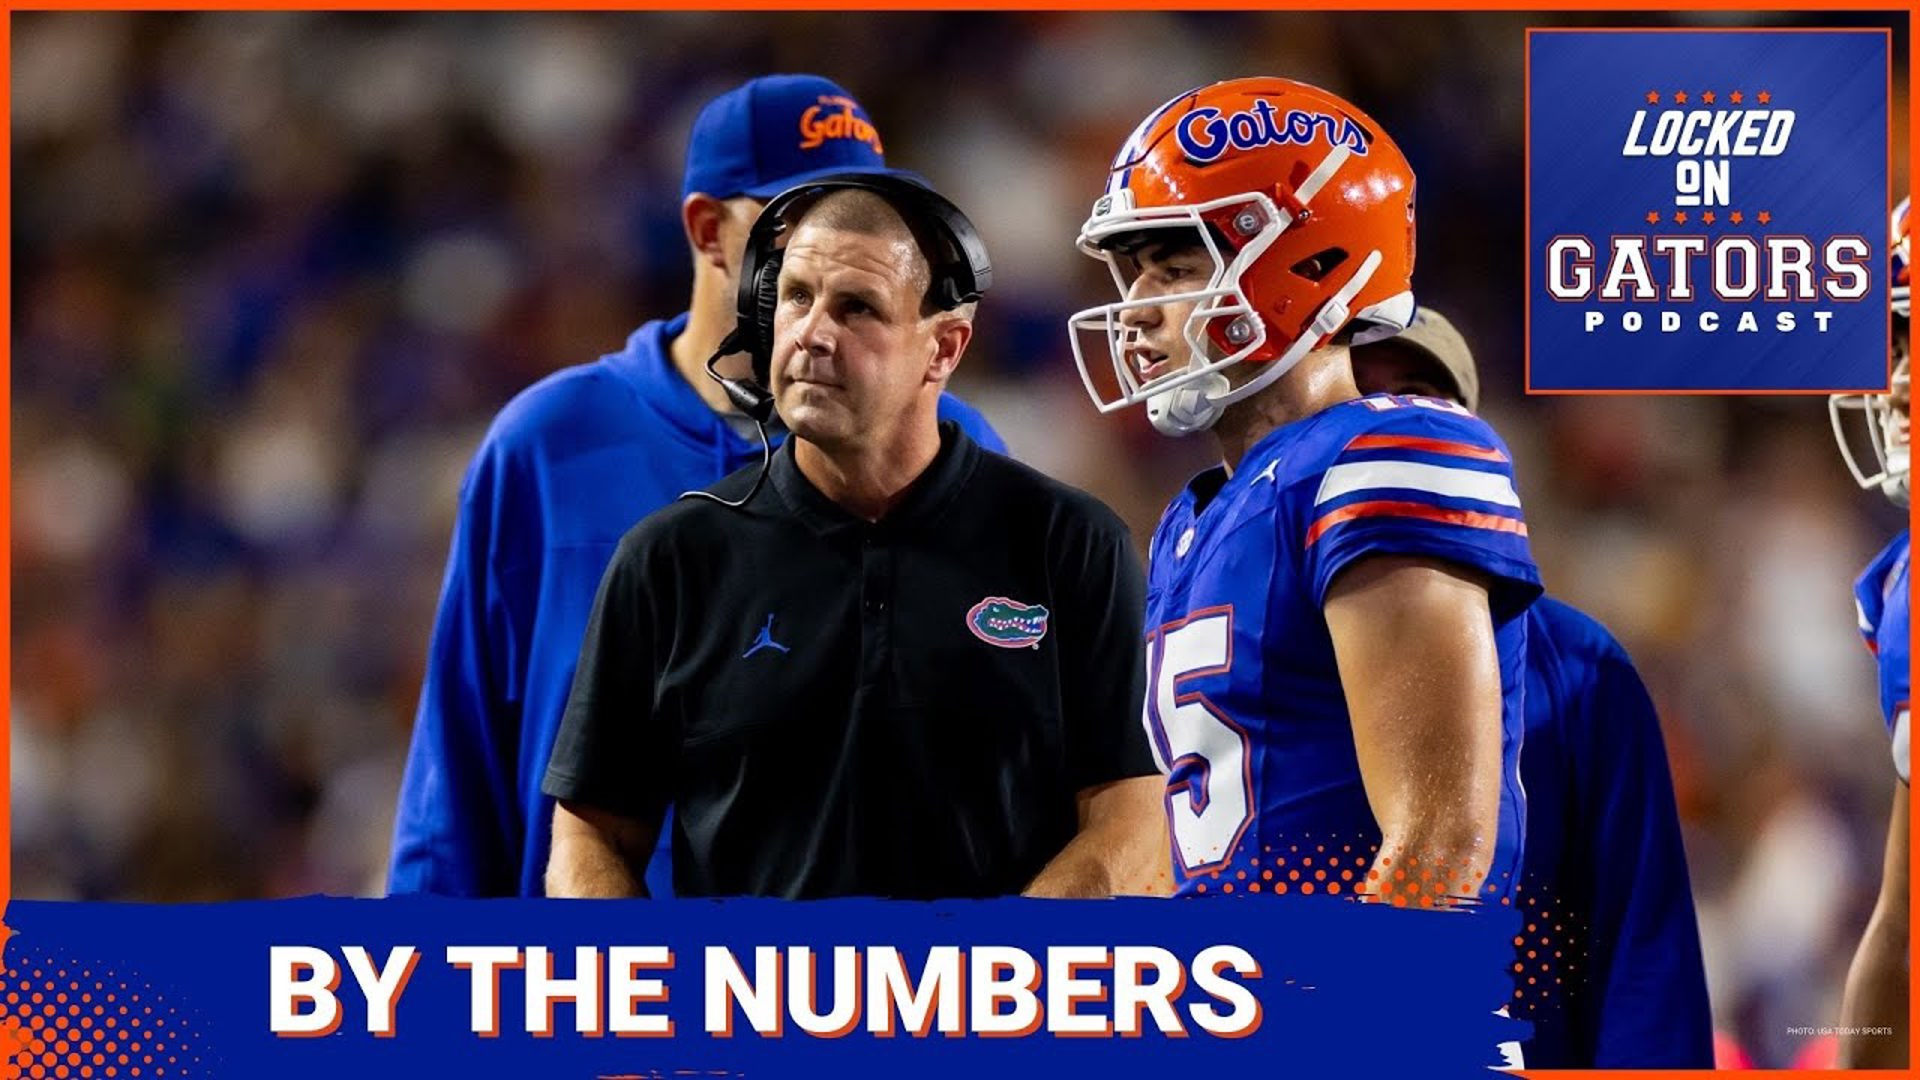 Florida Gators Offense is Predictable According to the Analytics